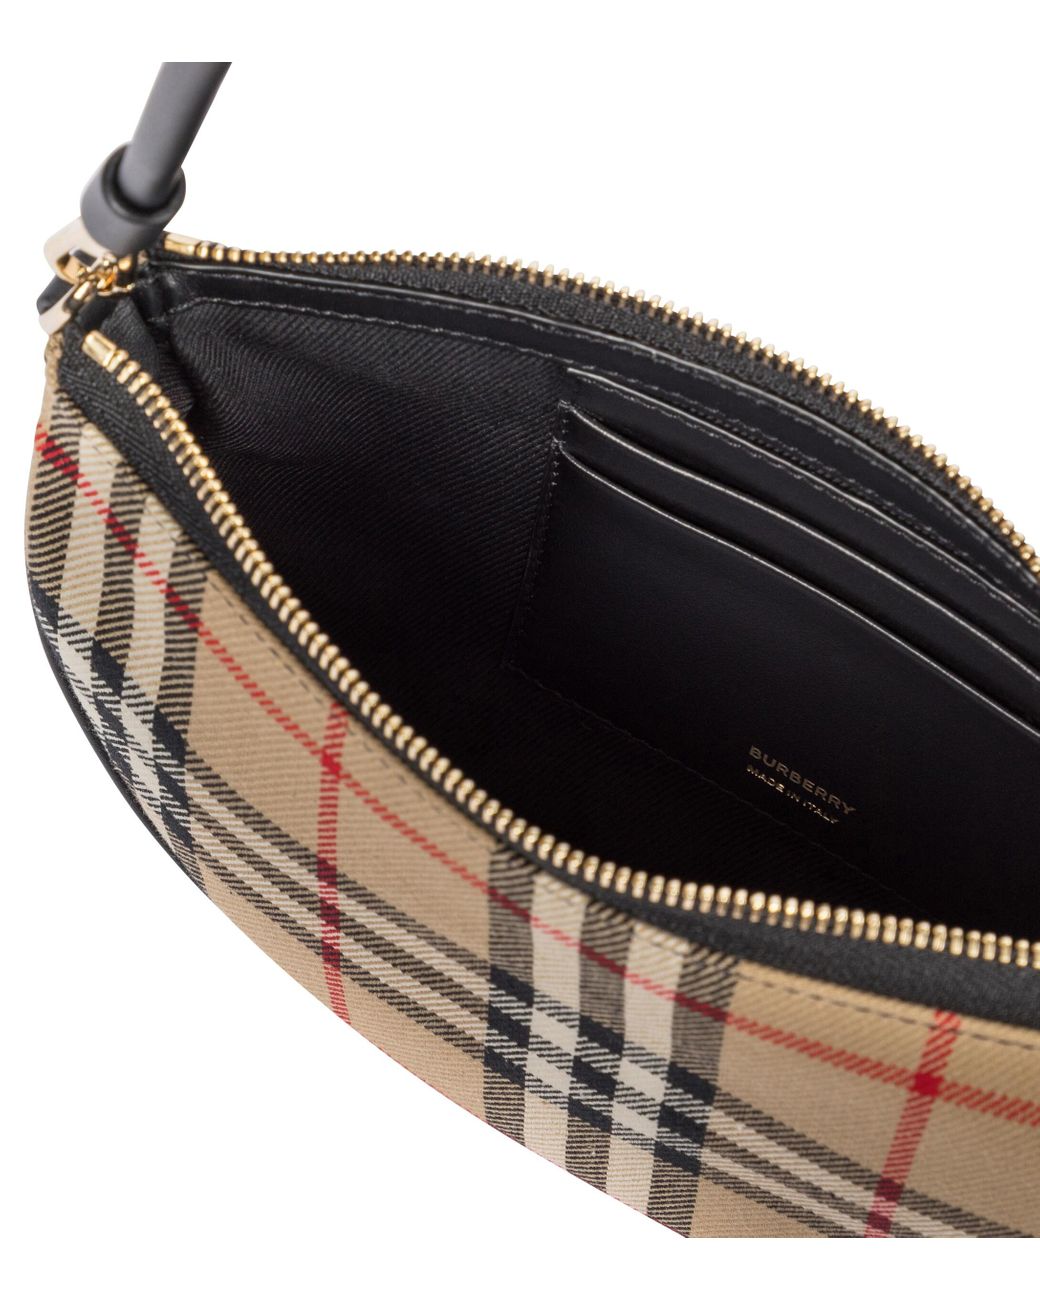 Burberry Olympia Pouch Checked Shoulder Bag in Natural | Lyst